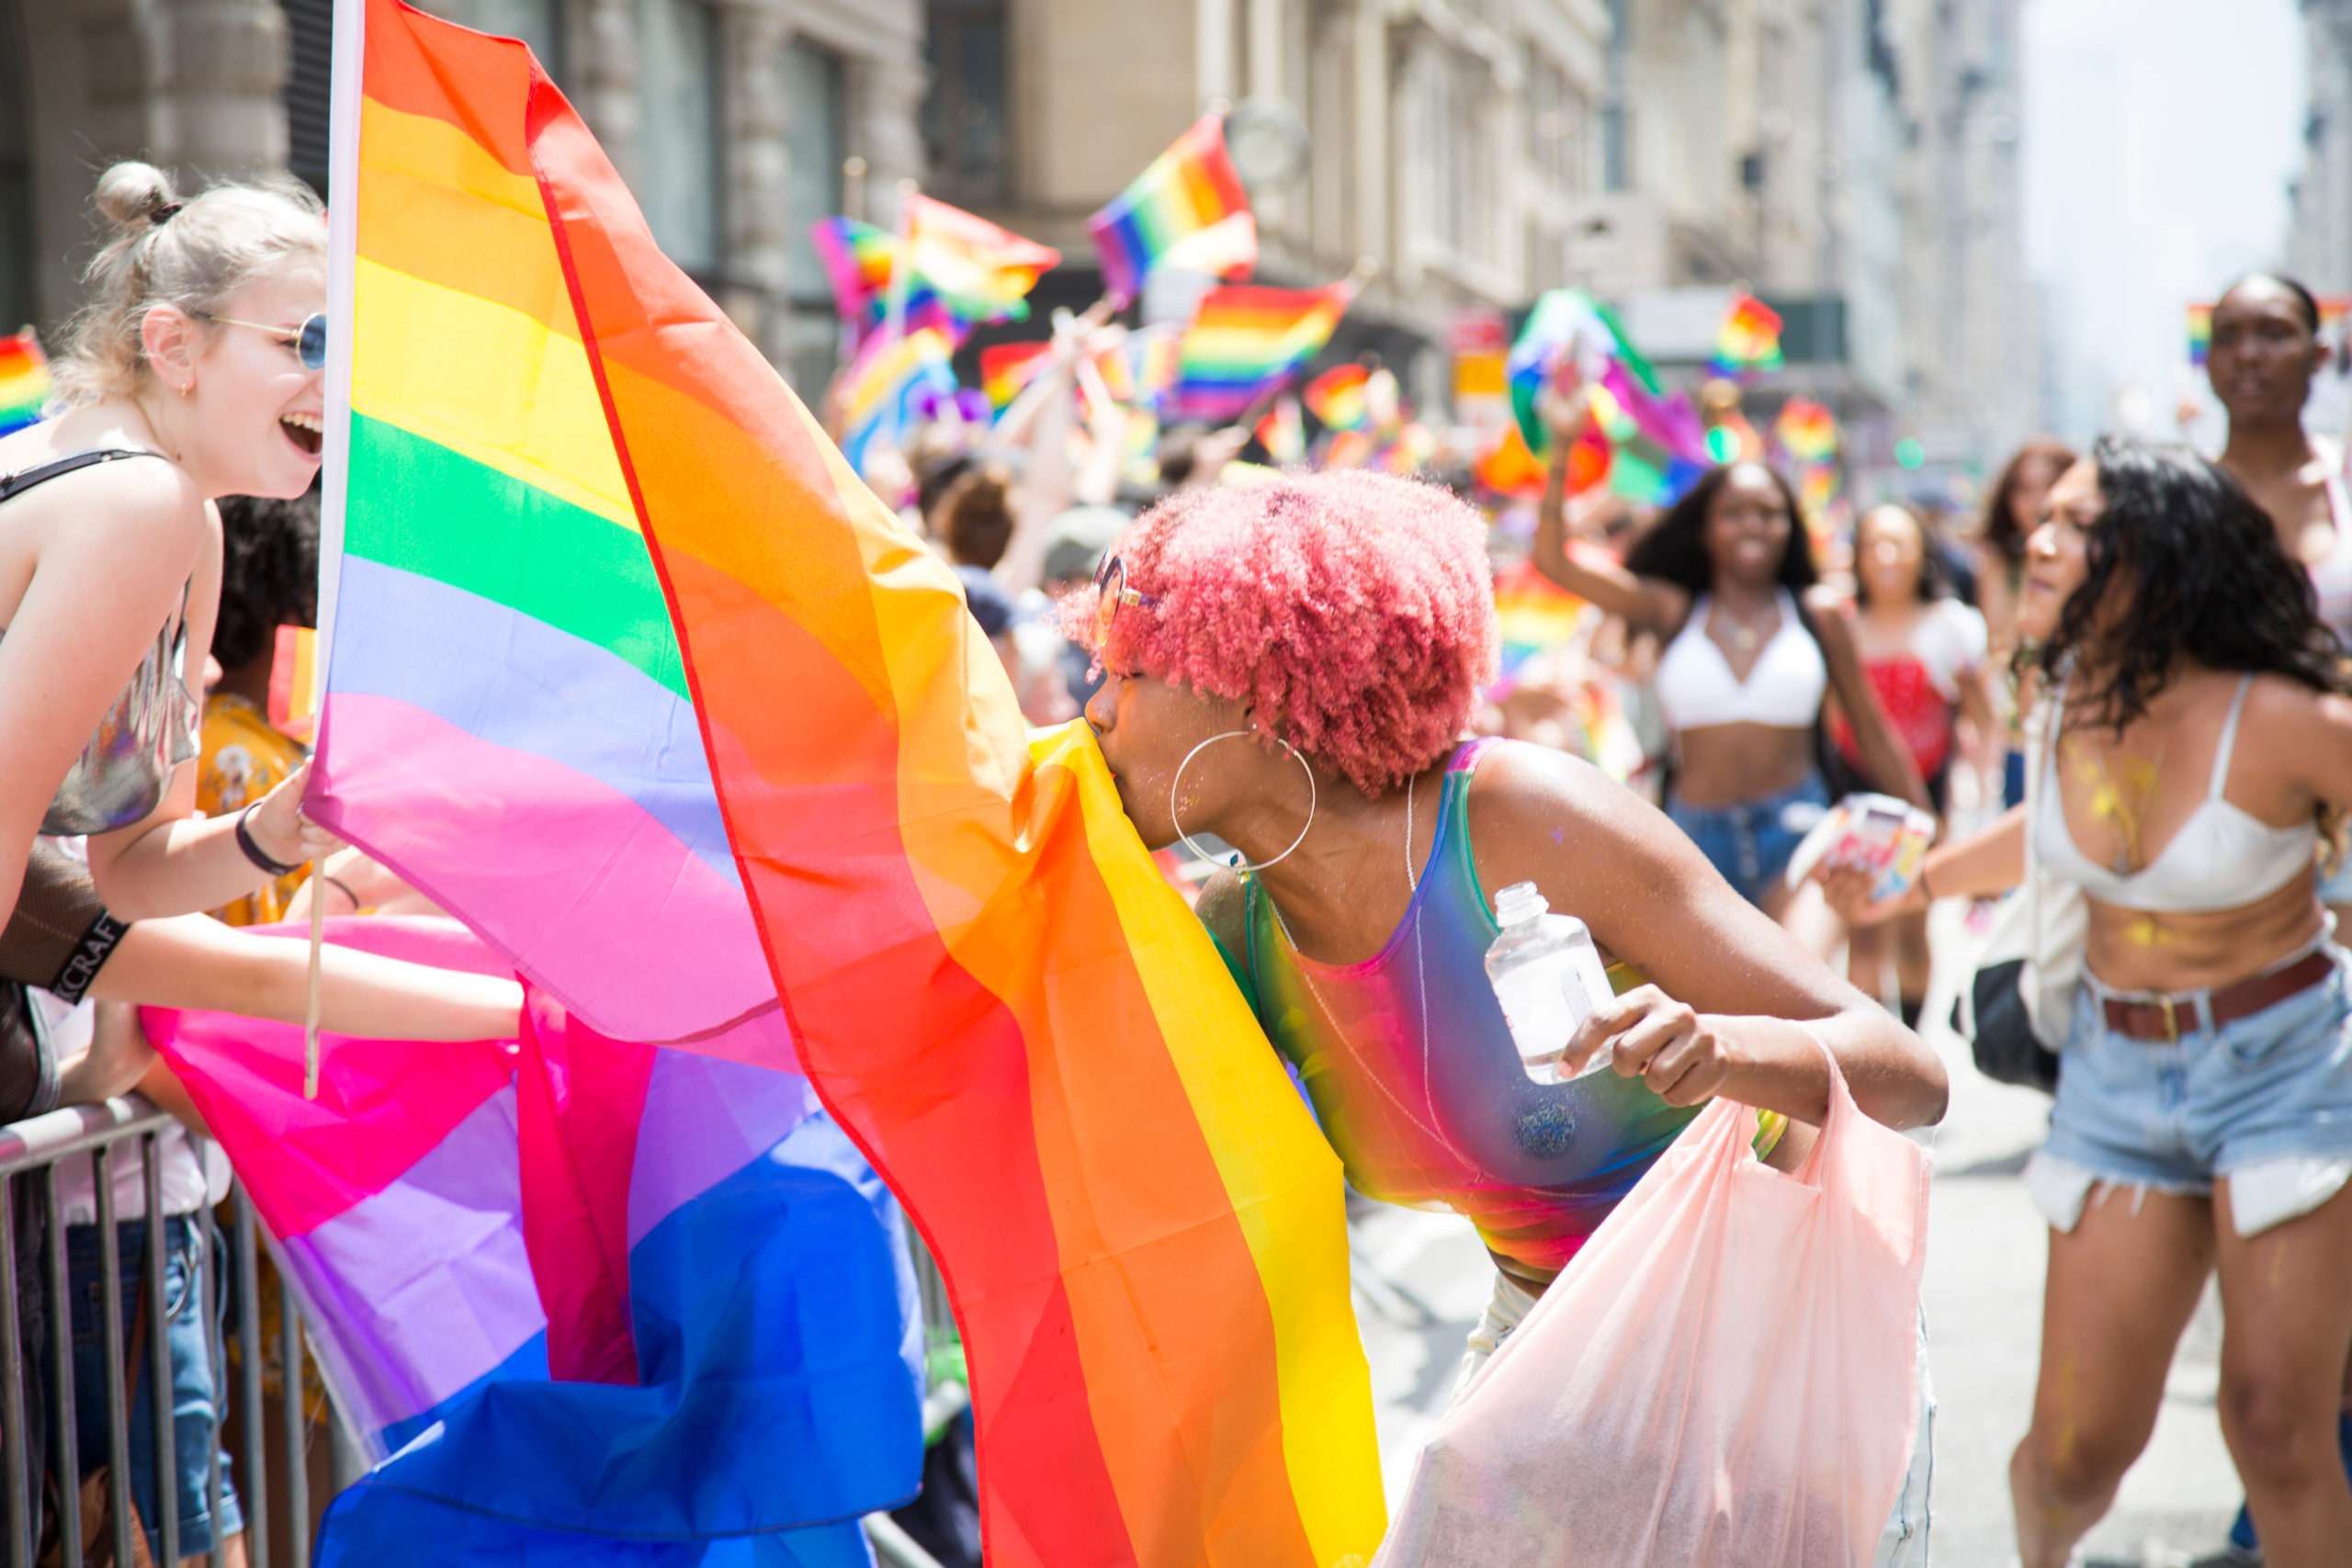 A woman with pink hair gives a kiss to someone behind a rainbow colored flag during the Pride Parade in NYC